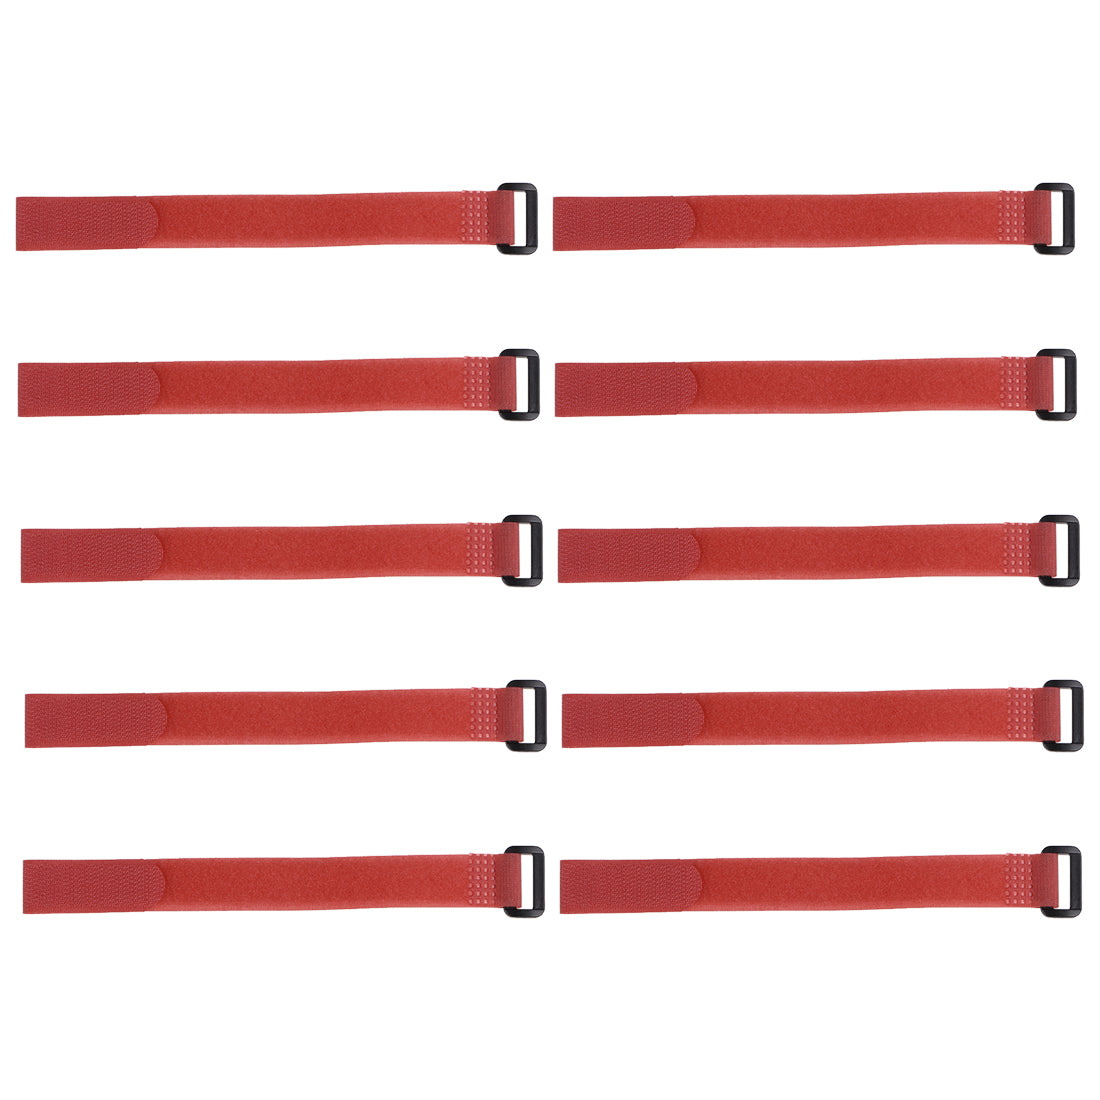 uxcell Uxcell 10pcs Hook and Loop Straps 3/4-inch x 14-inch Securing Straps Cable Tie (Red)